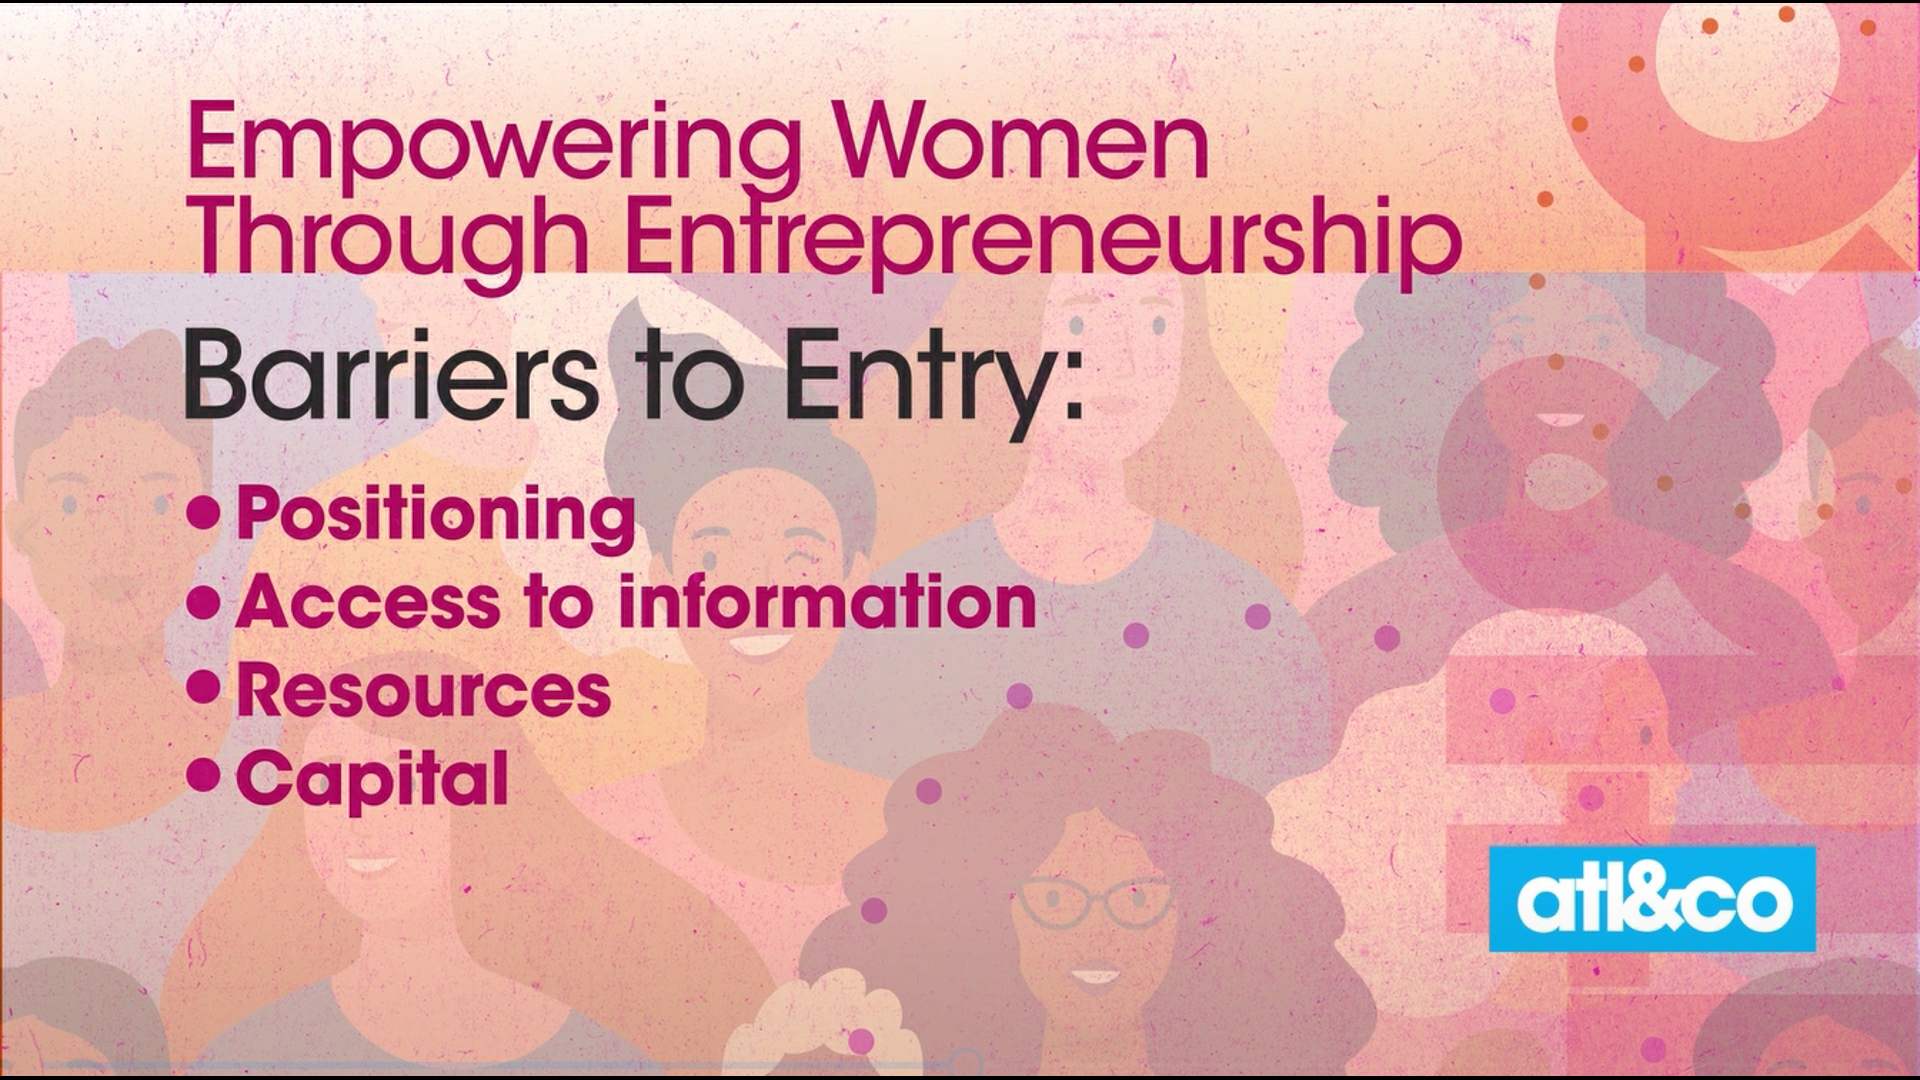 Learn more about female-owned businesses in Atlanta with insight from the Women's Entrepreneurship Initiative.